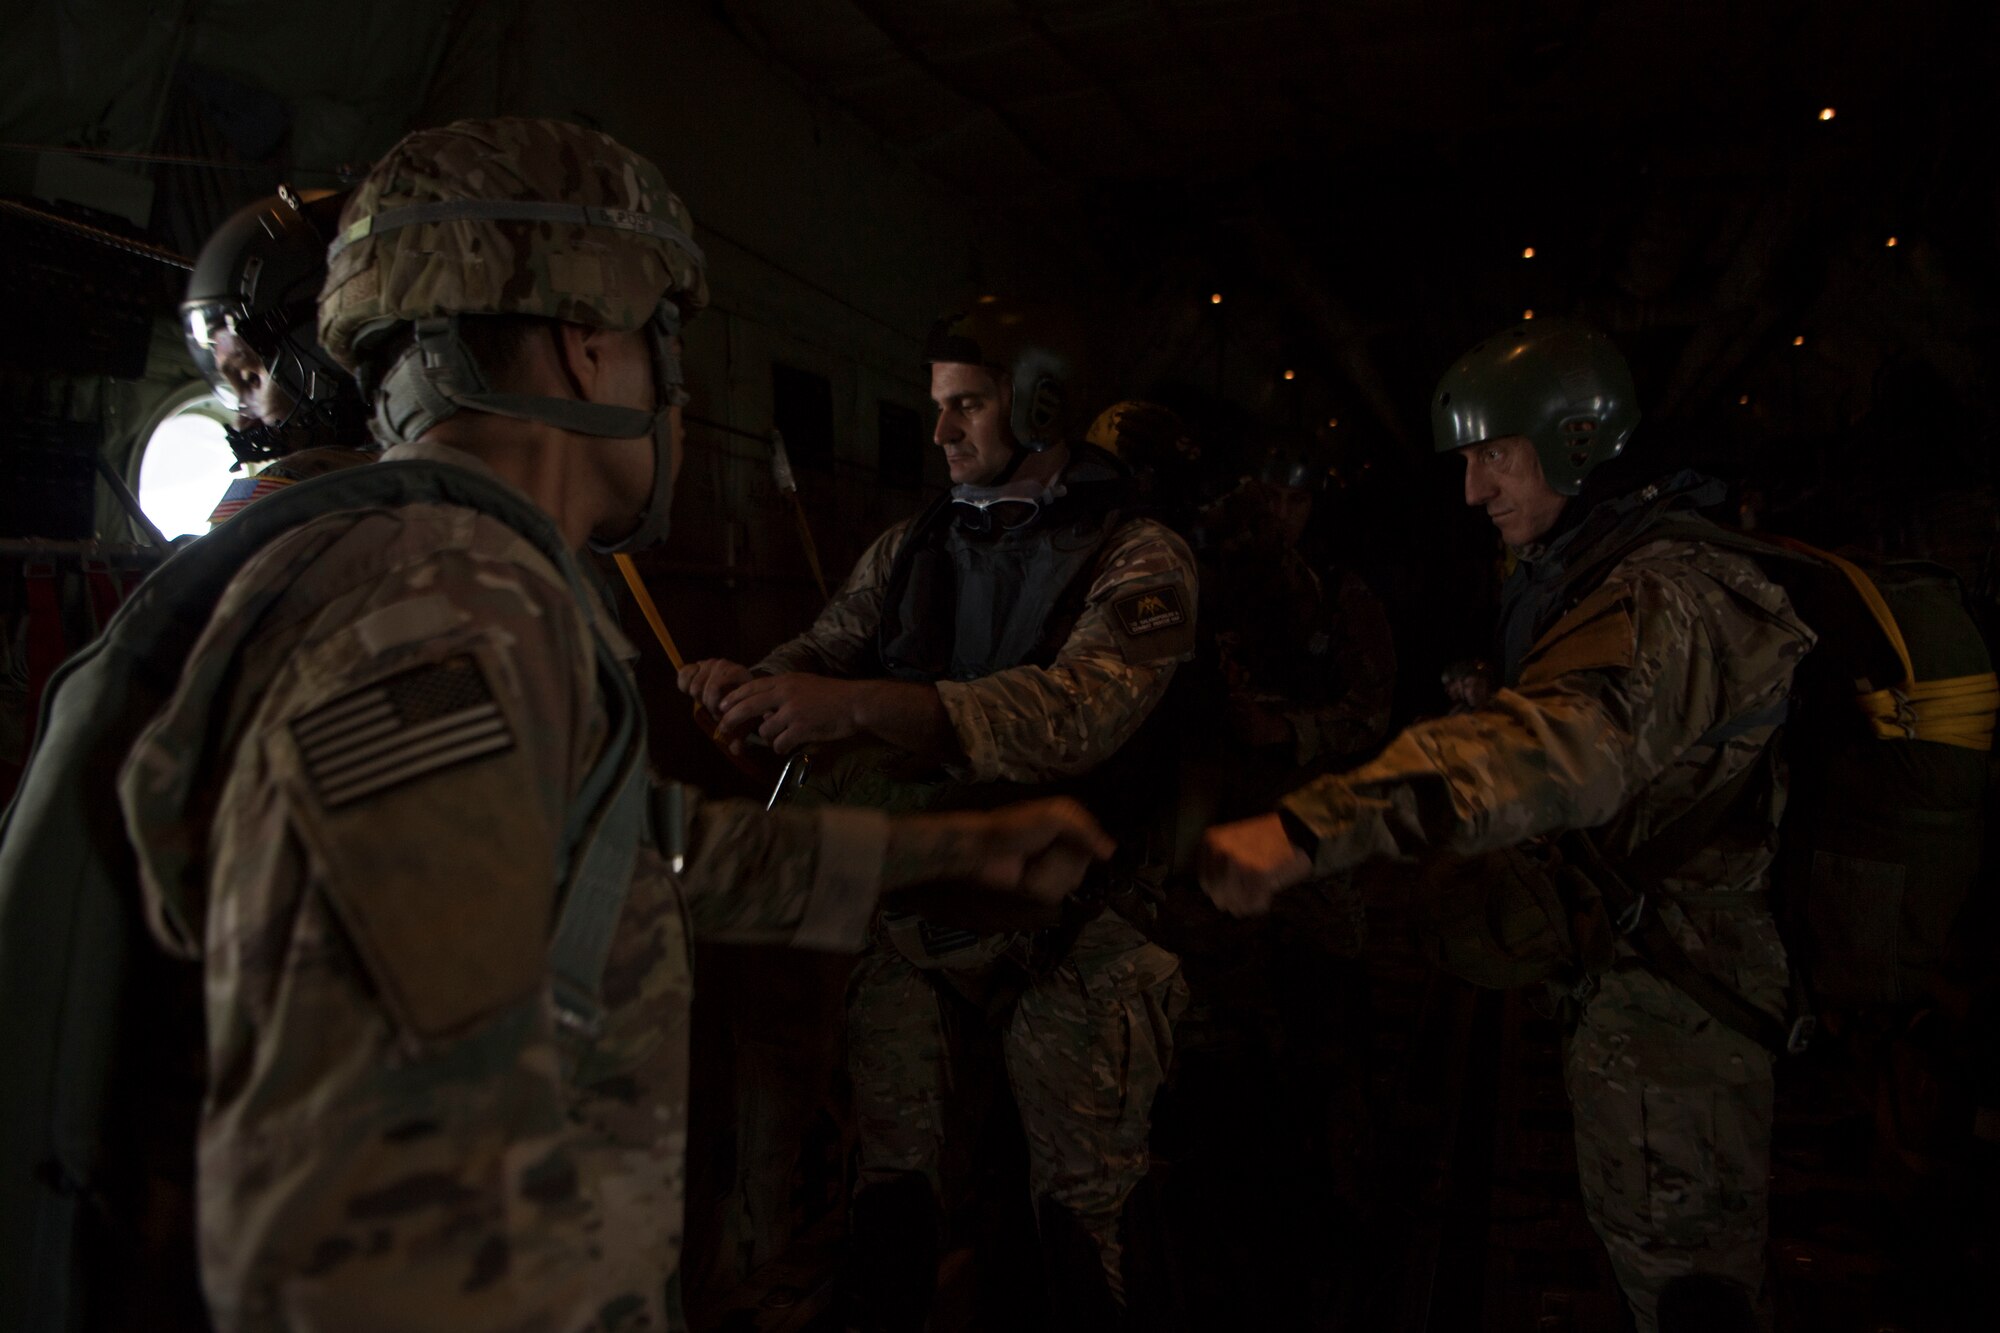 U.S. Army Sgt. Onnie Conyer, 21st Theater Sustainment Command 5th Quartermaster Company jumpmaster, fist bumps a Hellenic paratrooper during an exercise Stolen Cerberus V training mission in the skies near Elefsis Air Base, Greece, May 9, 2018. Jumpmasters are responsible for all parachutes and troopers jumping off the aircraft. (U.S. Air Force photo by Senior Airman Devin M. Rumbaugh)